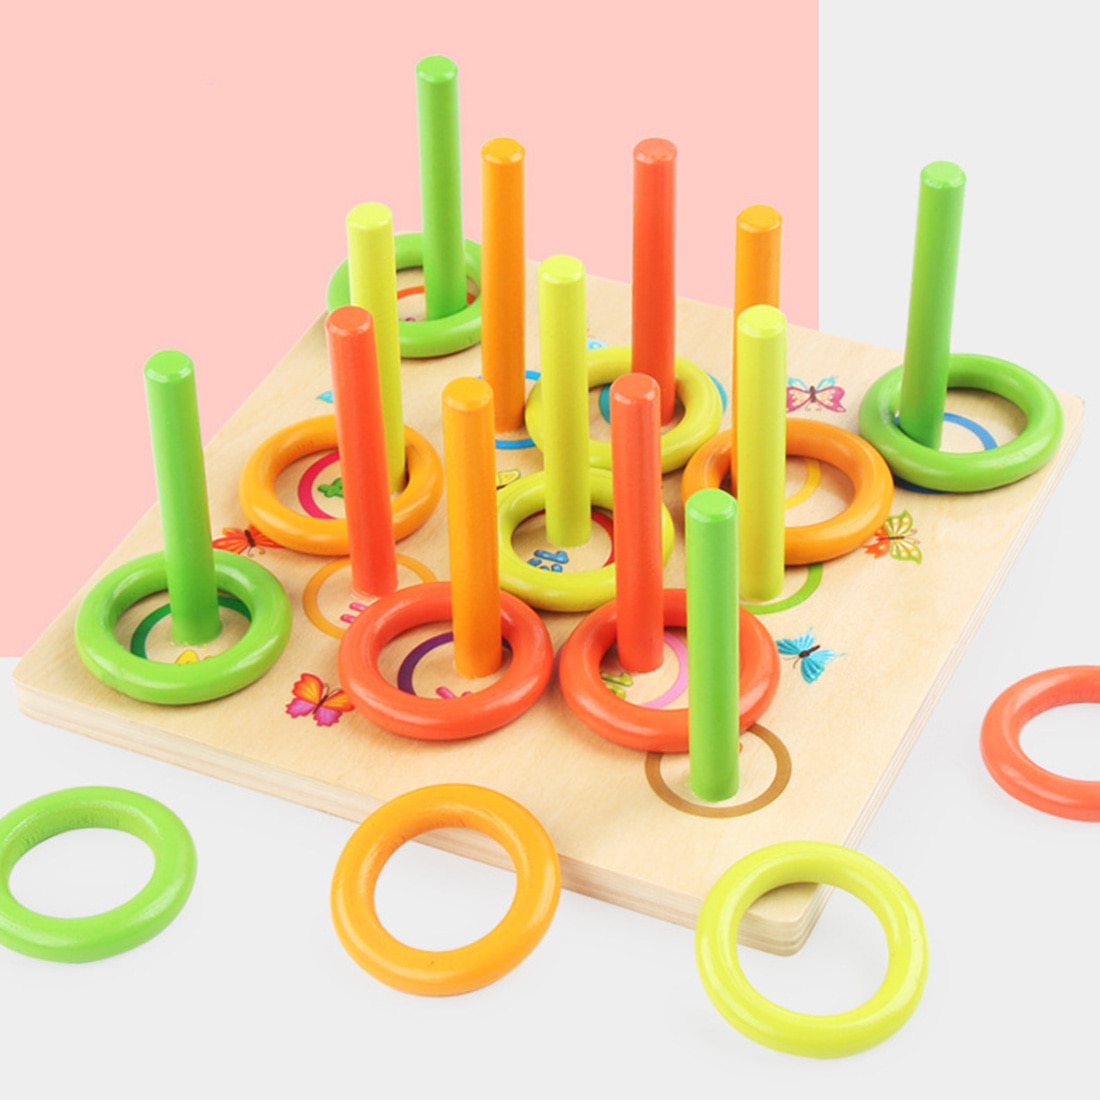 Children Wooden Block Throwing Ferrule Toys Throwing Game Ring Hoop Interactive Wooden Blocks Toys For Kids Christmas Gifts